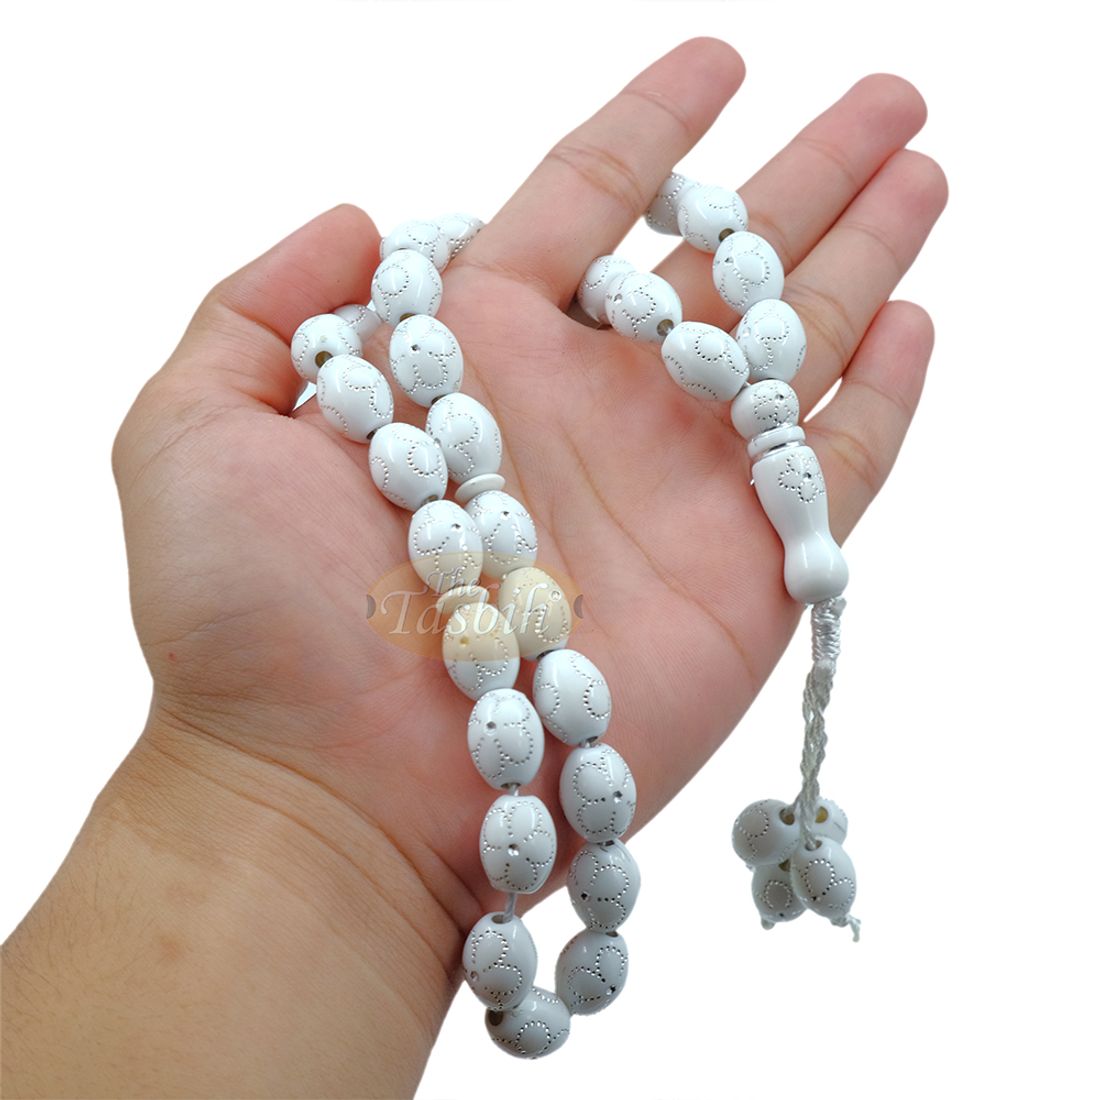 Large White Tasbih 11×14-mm Plastic Resin Electroplated Silver-tone Flower Design 33-ct Prayer Dhikr Beads